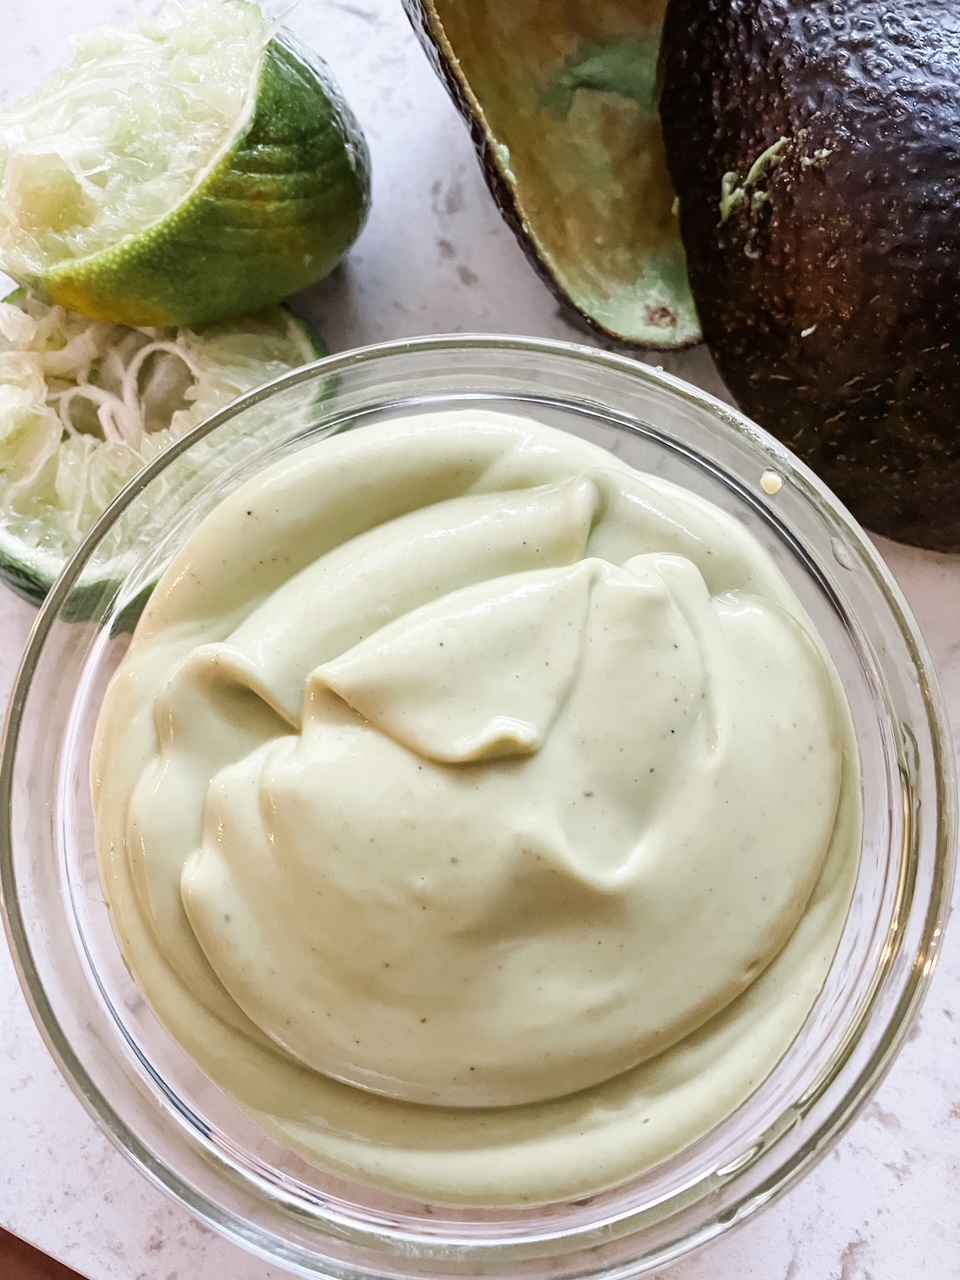 The avocado dressing in a clear cup